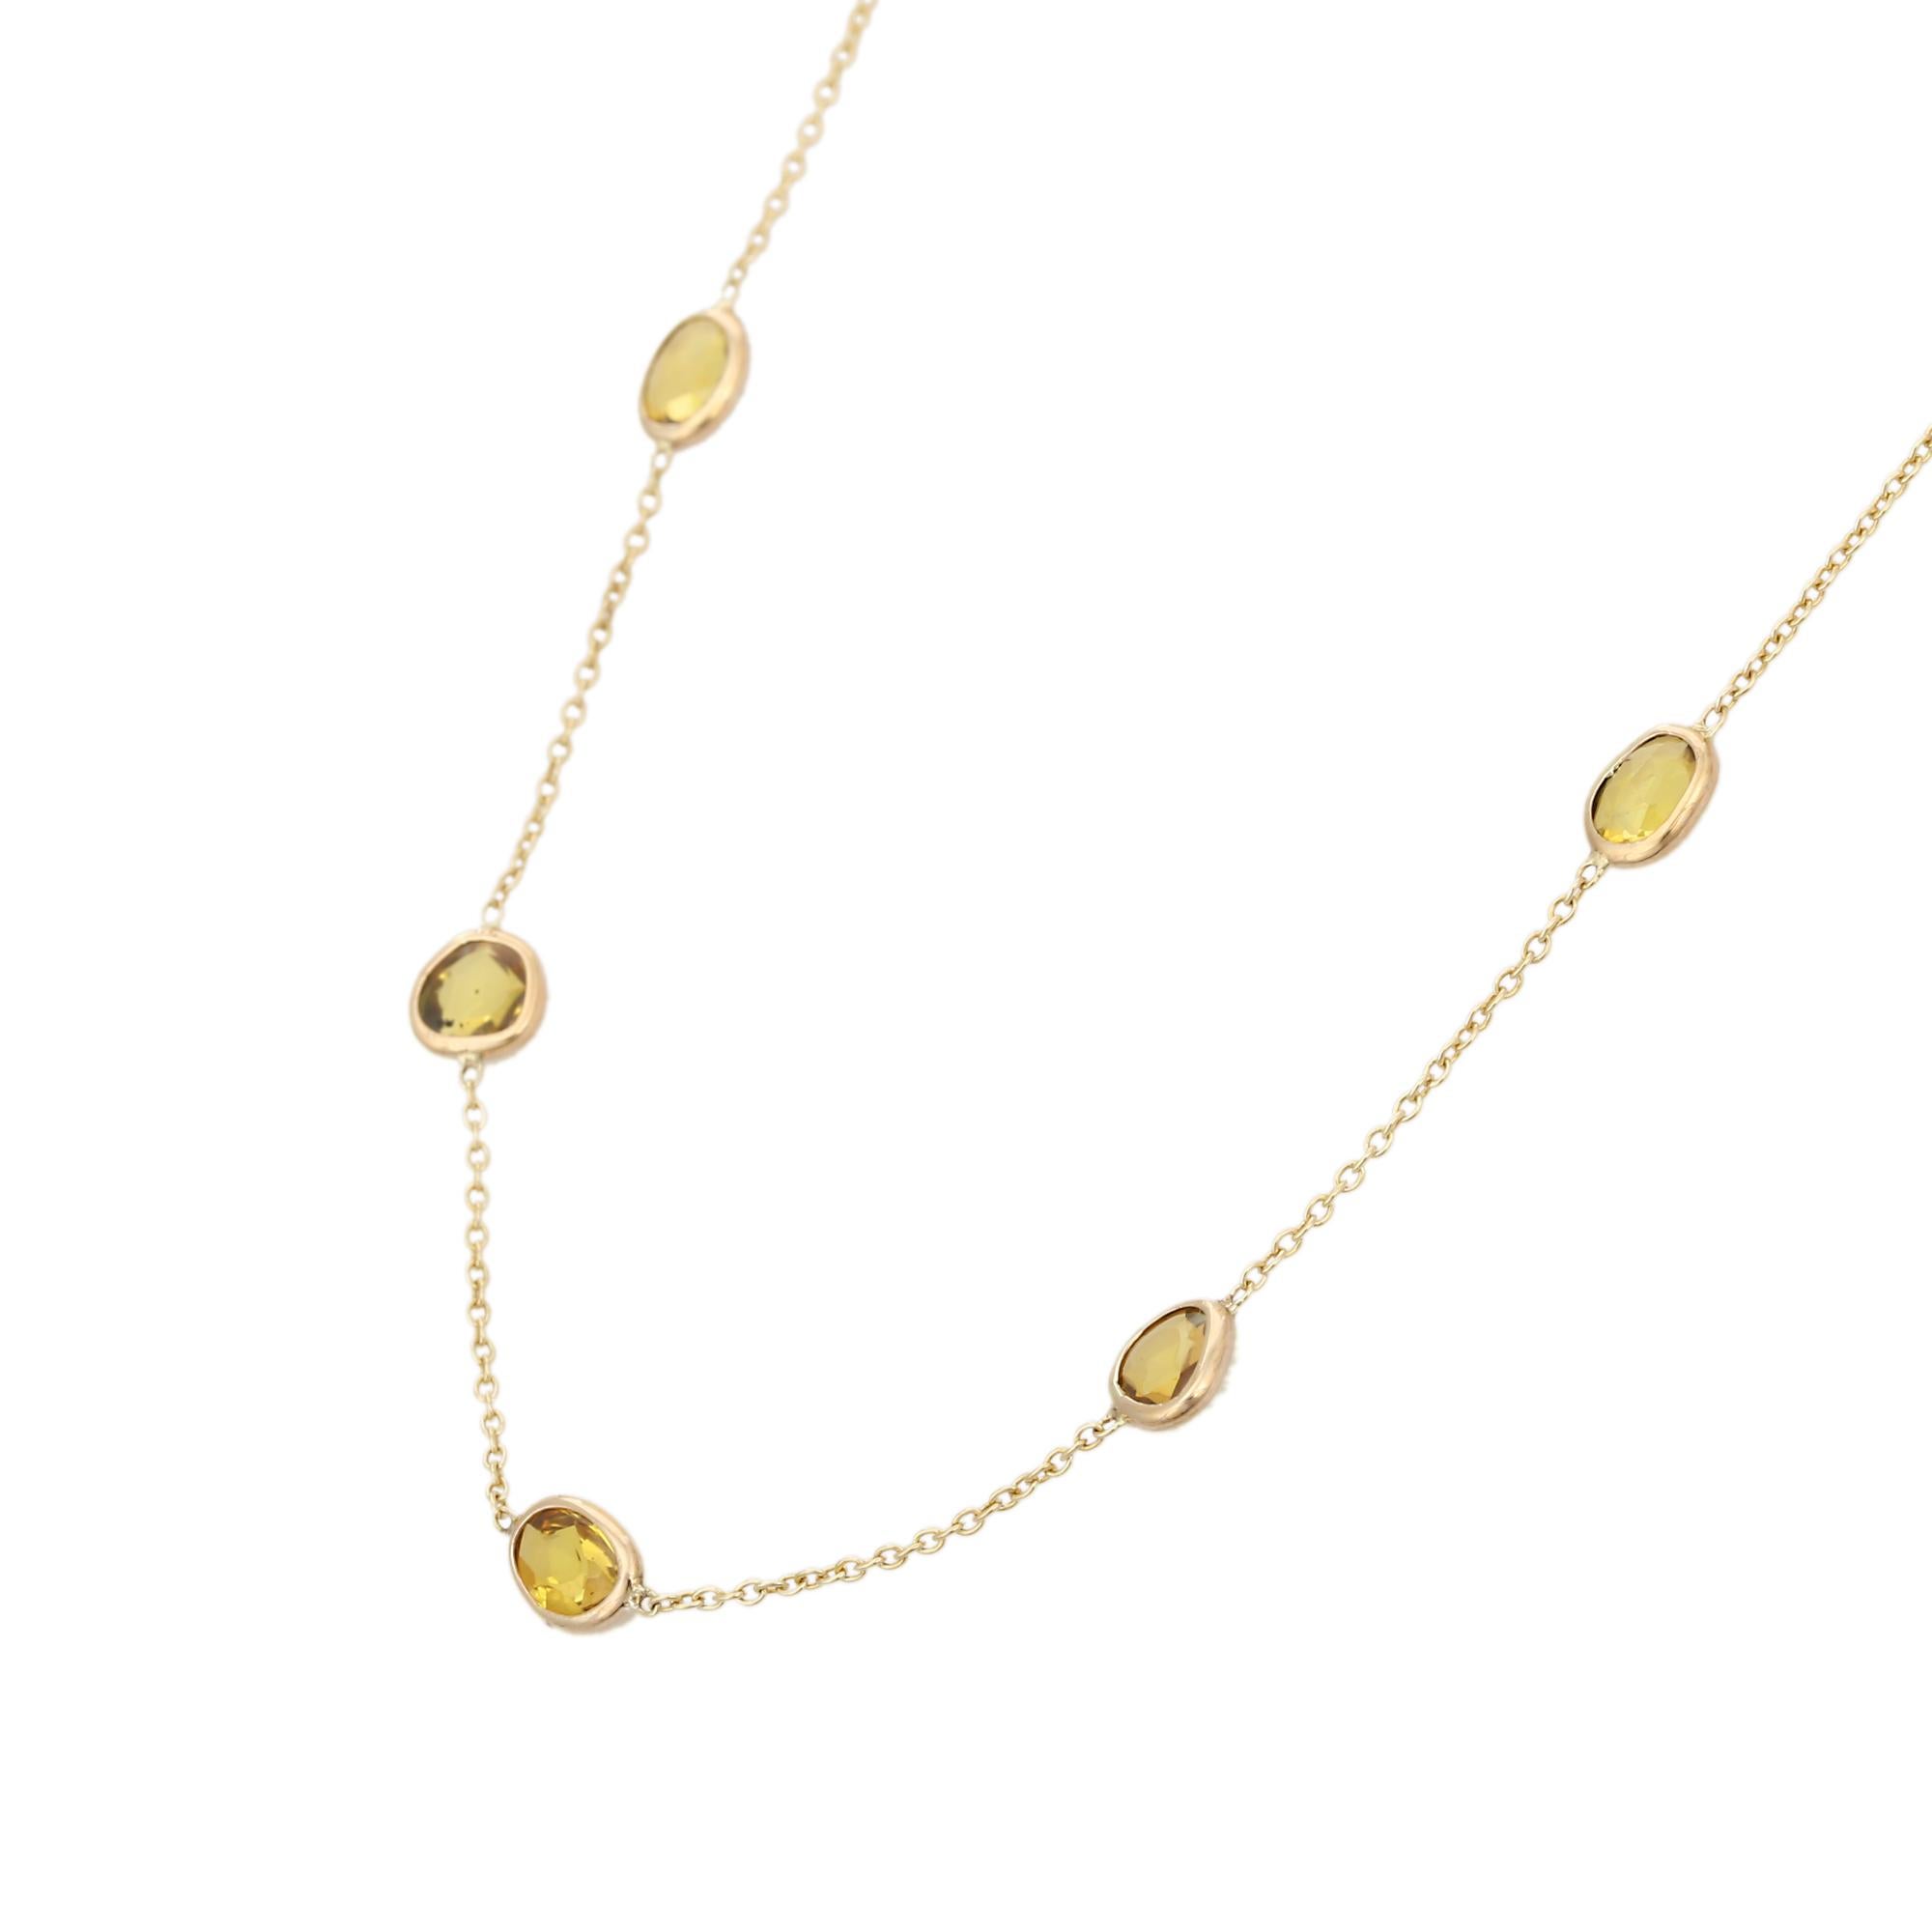 Yellow Sapphire Station Chain Necklace in 14K Gold studded with round cut yellow sapphire. This stunning piece of jewelry instantly elevates a casual look or dressy outfit. 
Sapphire stimulate concentration and reduces stress.
Designed with a yellow